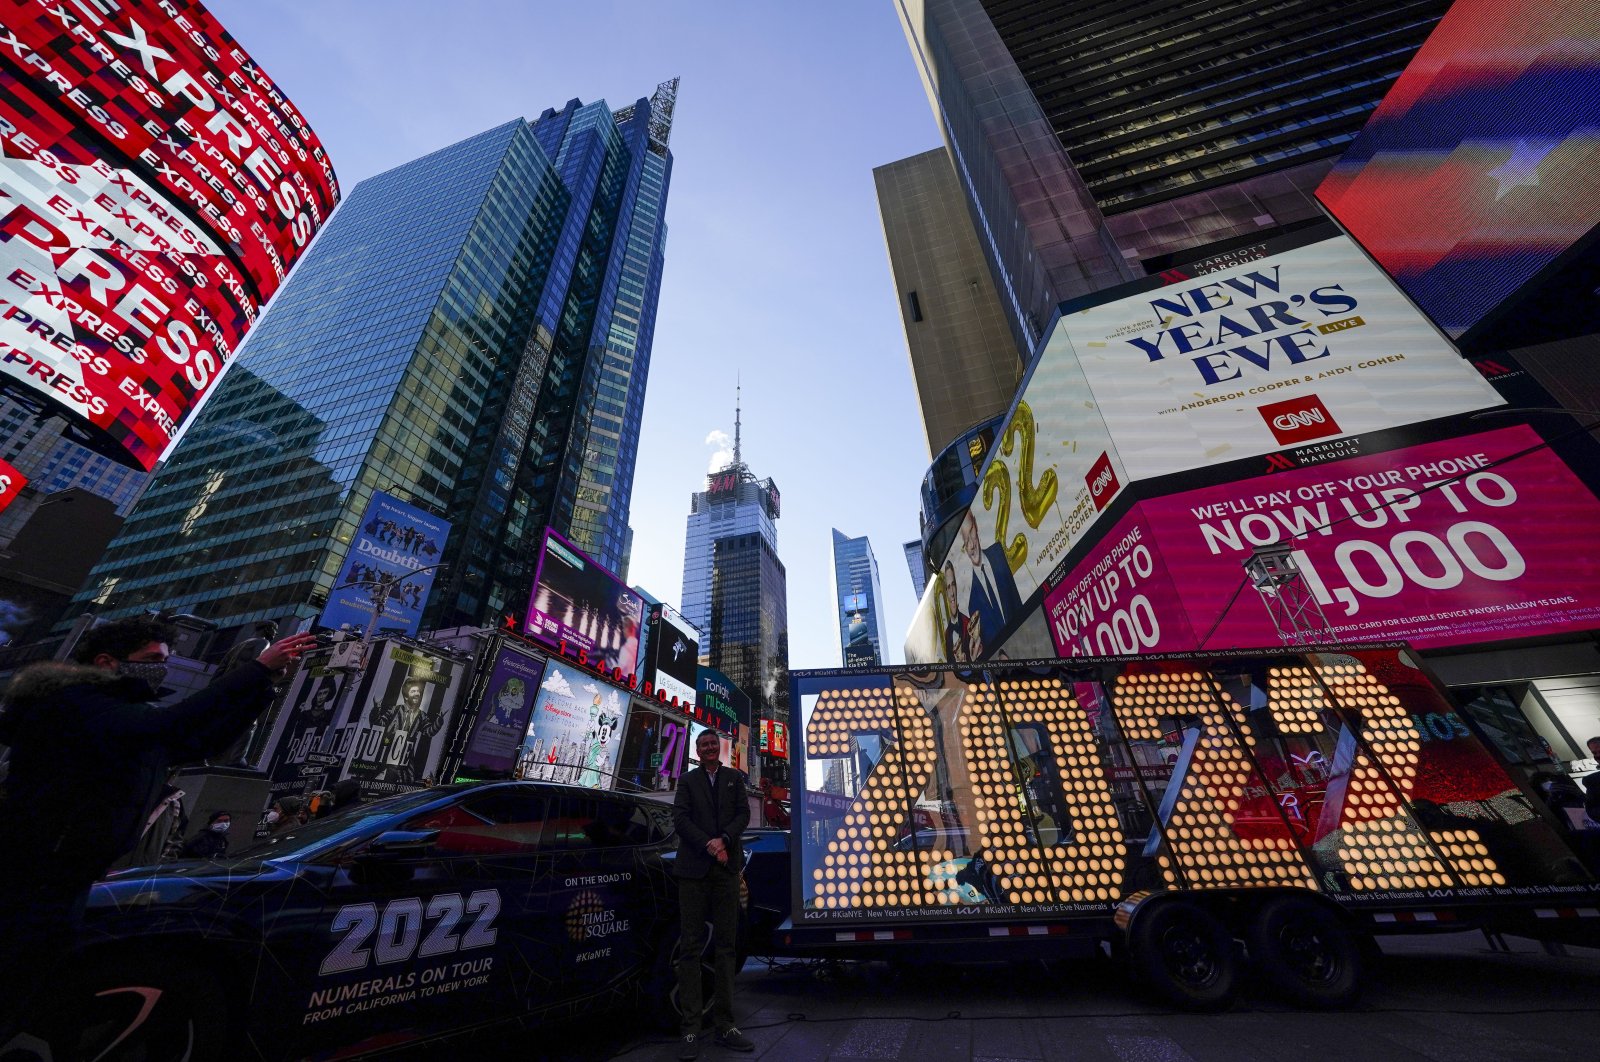 The 2022 sign that will be lit on top of a building on New Year&#039;s Eve is displayed in Times Square, New York, the U.S., Dec. 20, 2021. (AP Photo)